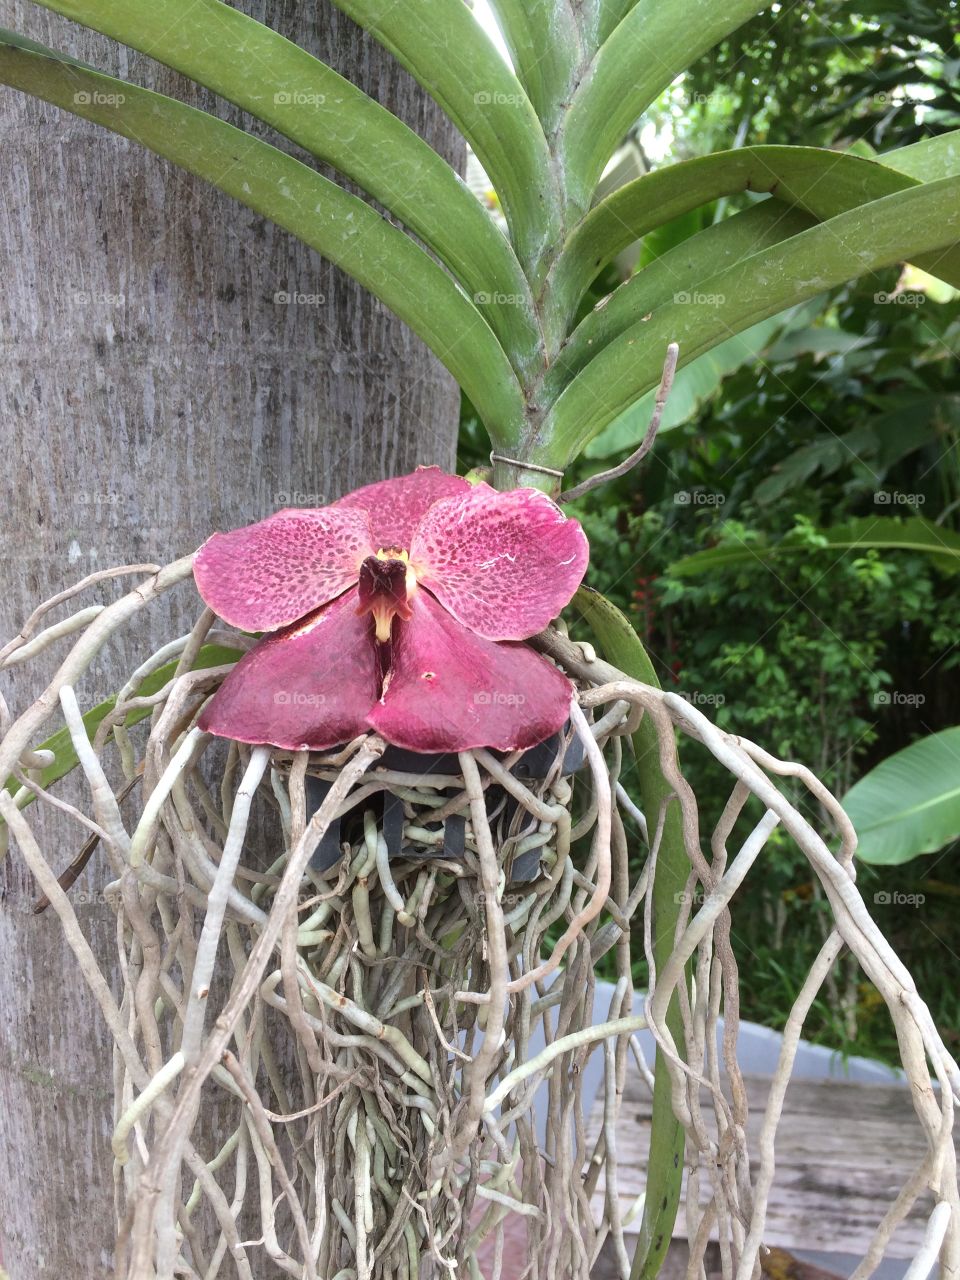 Orchid flowers are blooming